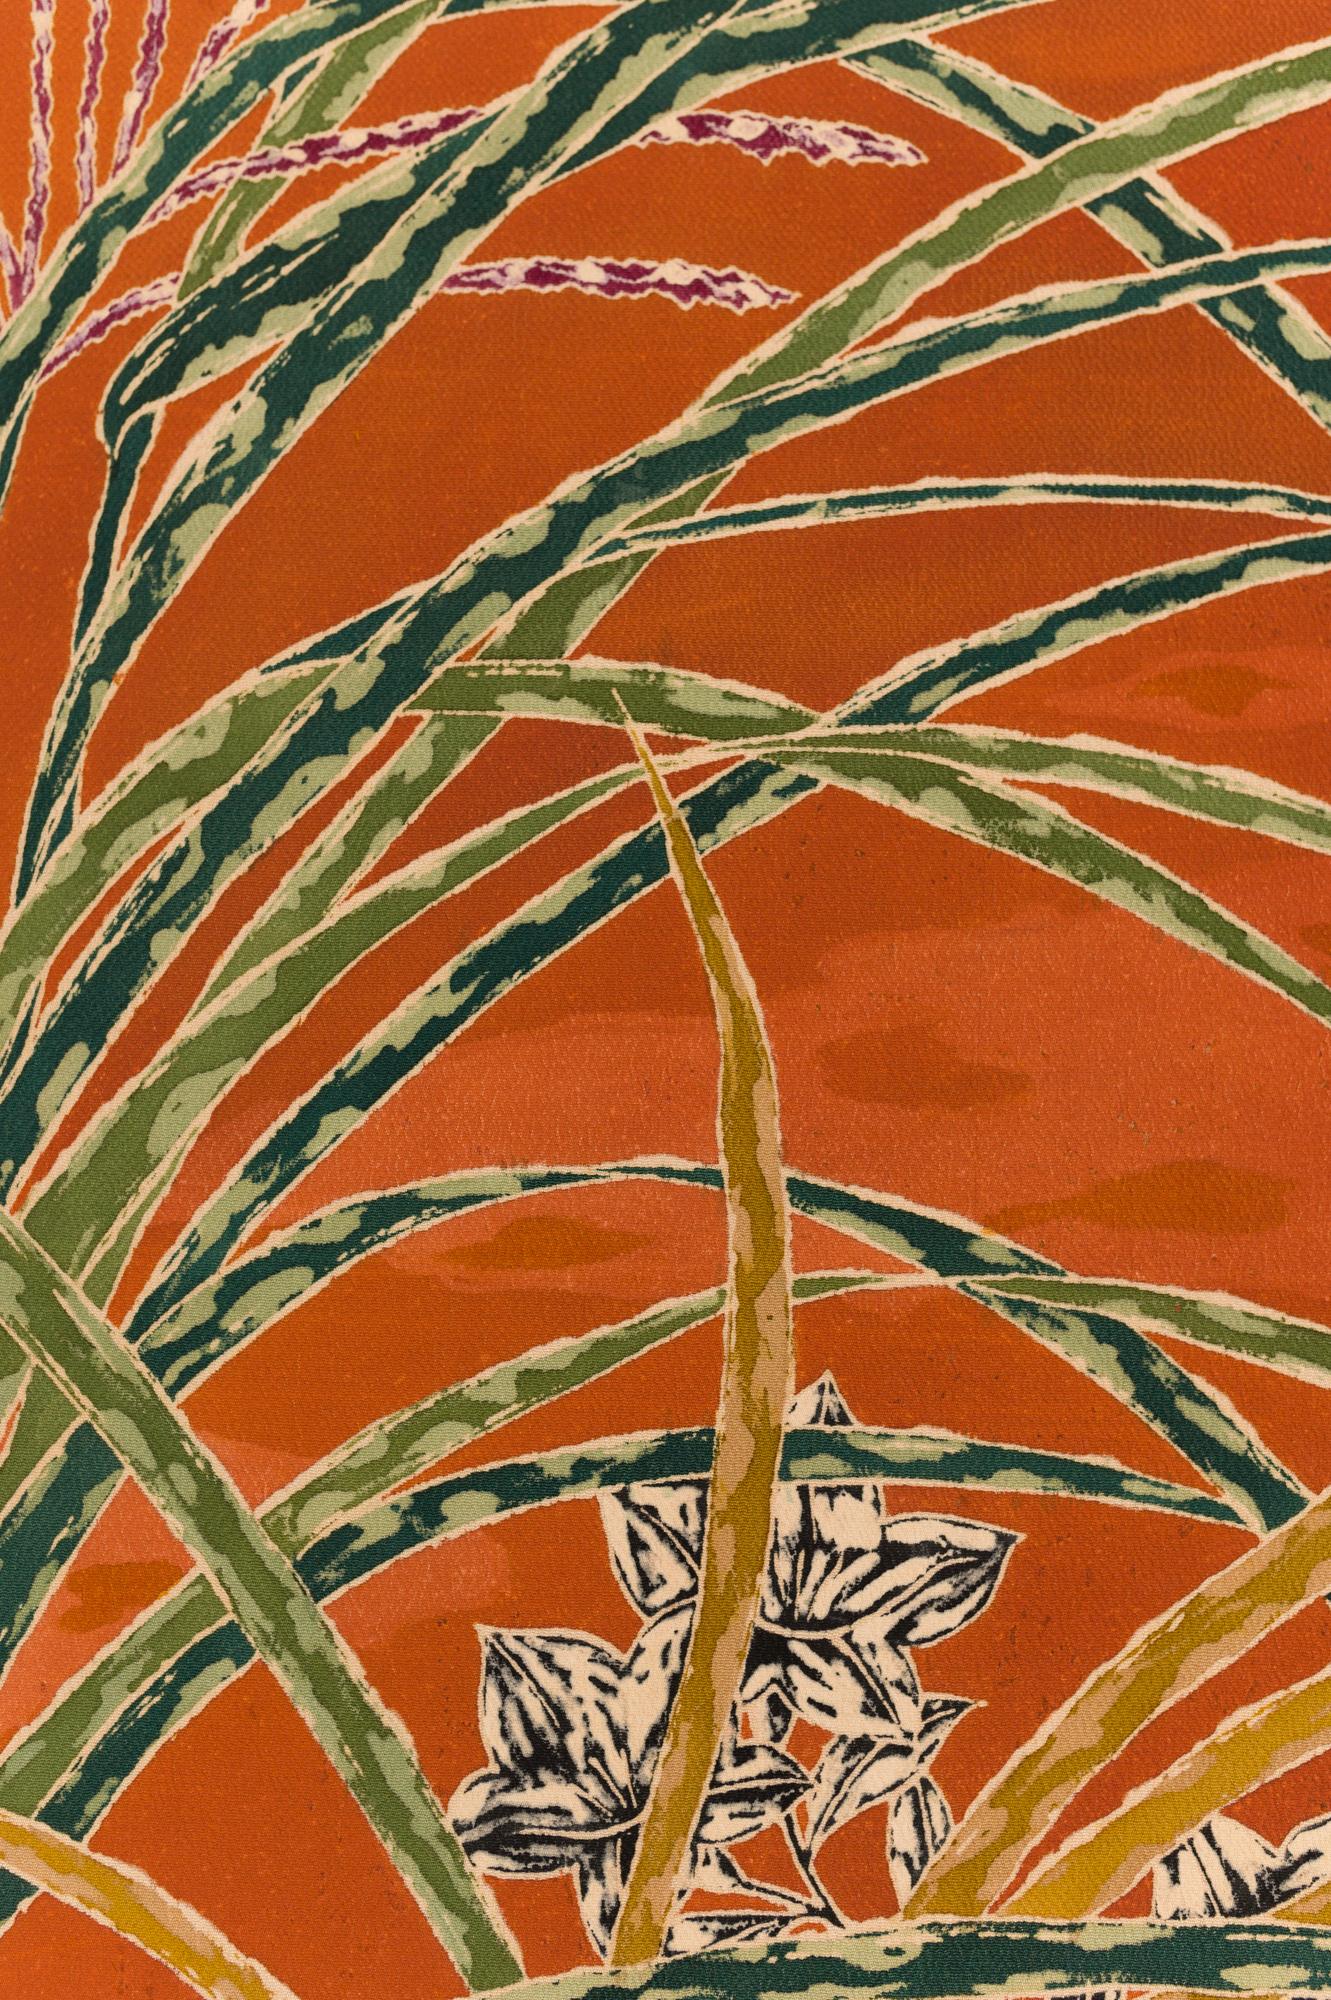 Hand-Painted Japanese Two Panel Screen Romping Steers in a Pasture of Wild Grasses